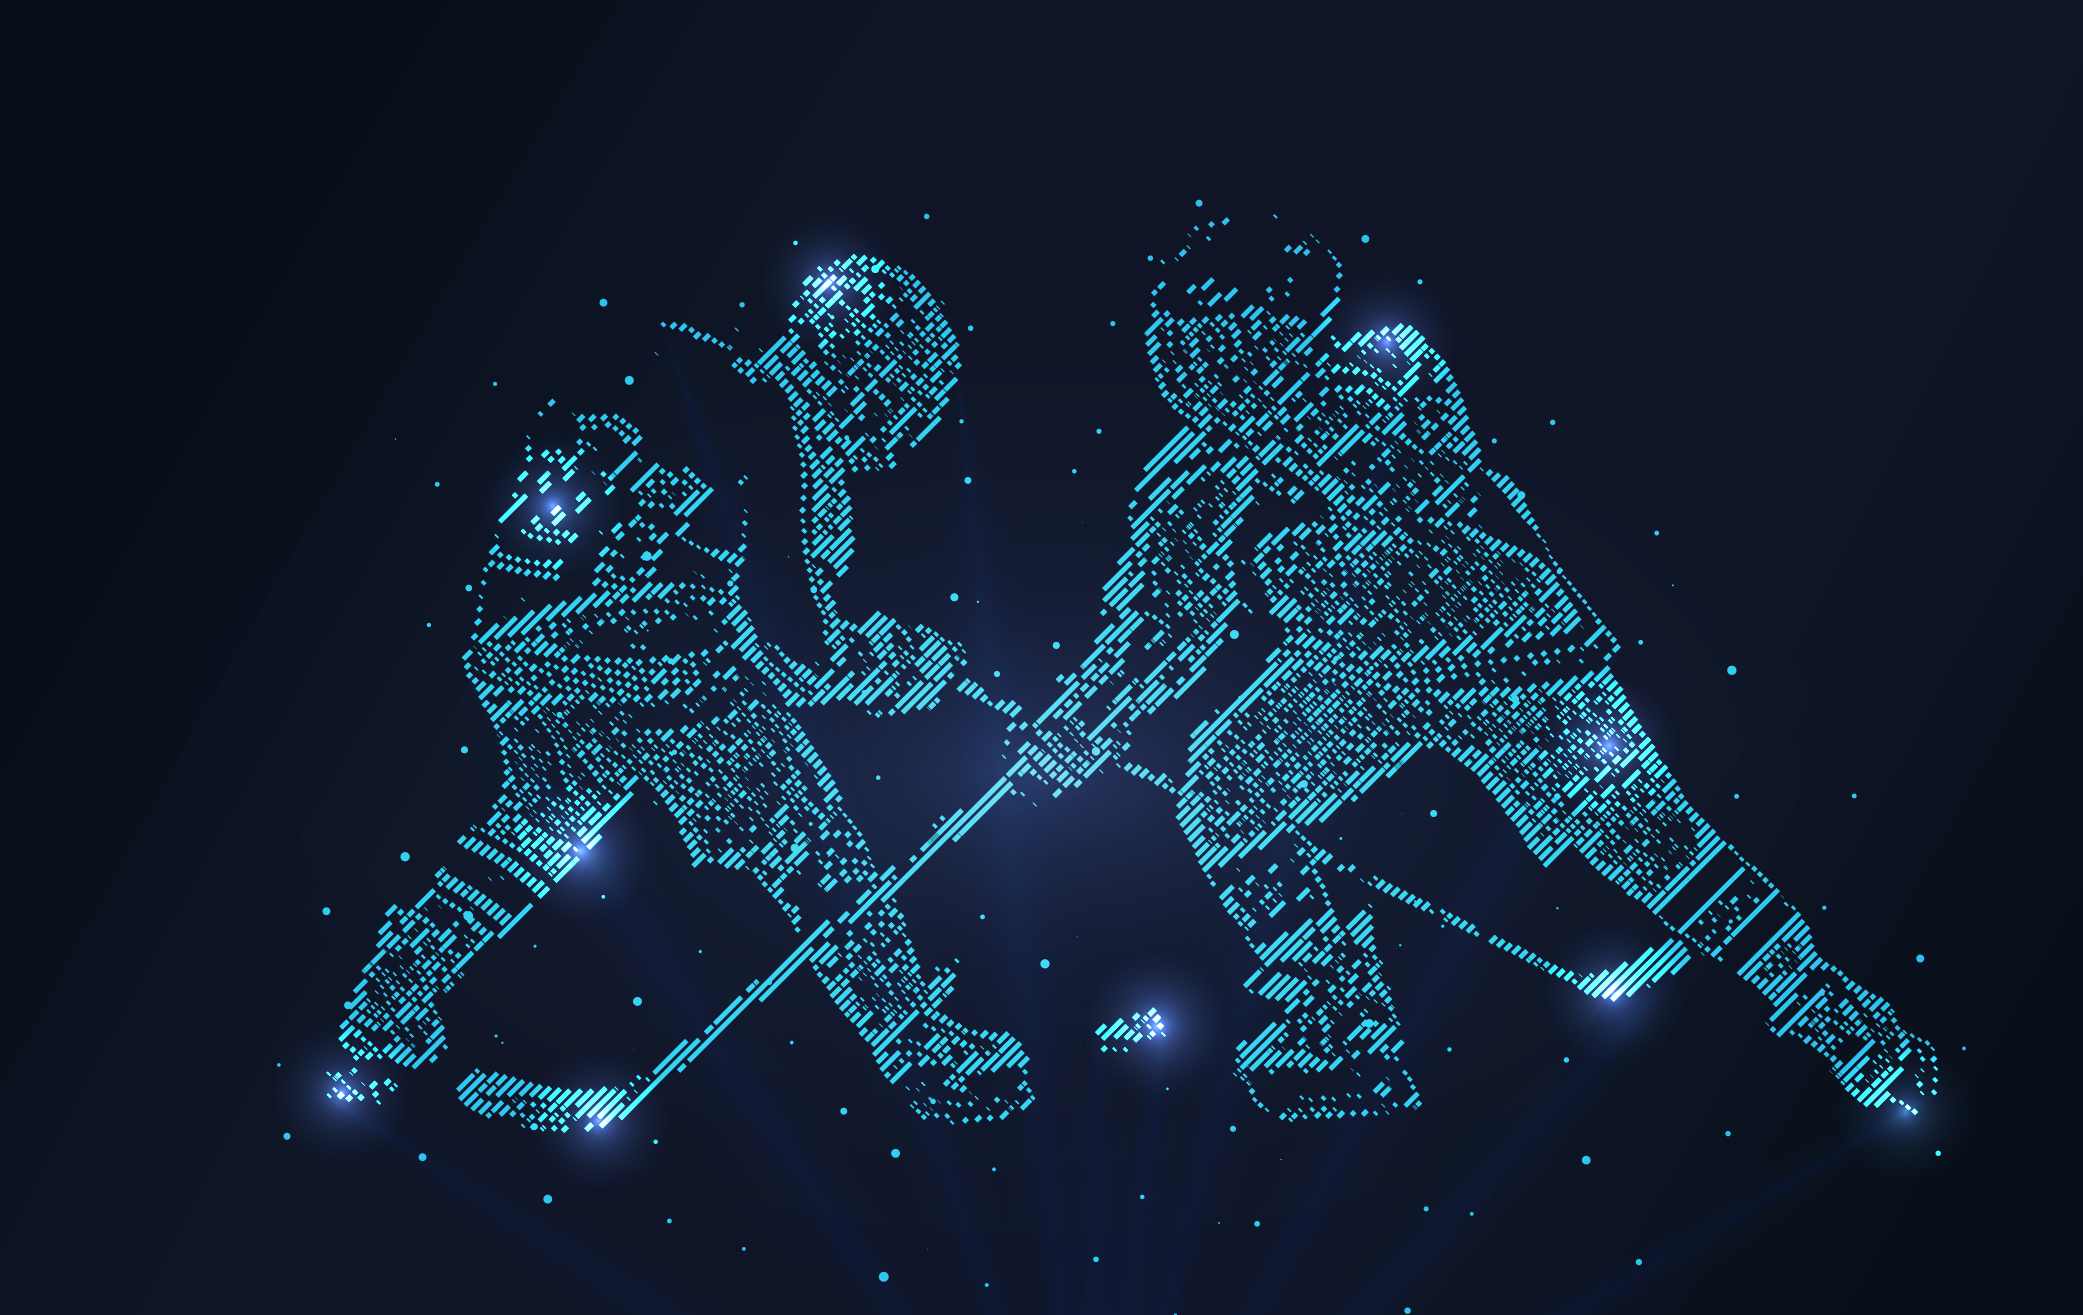 Two ice hockey players and millions of data points